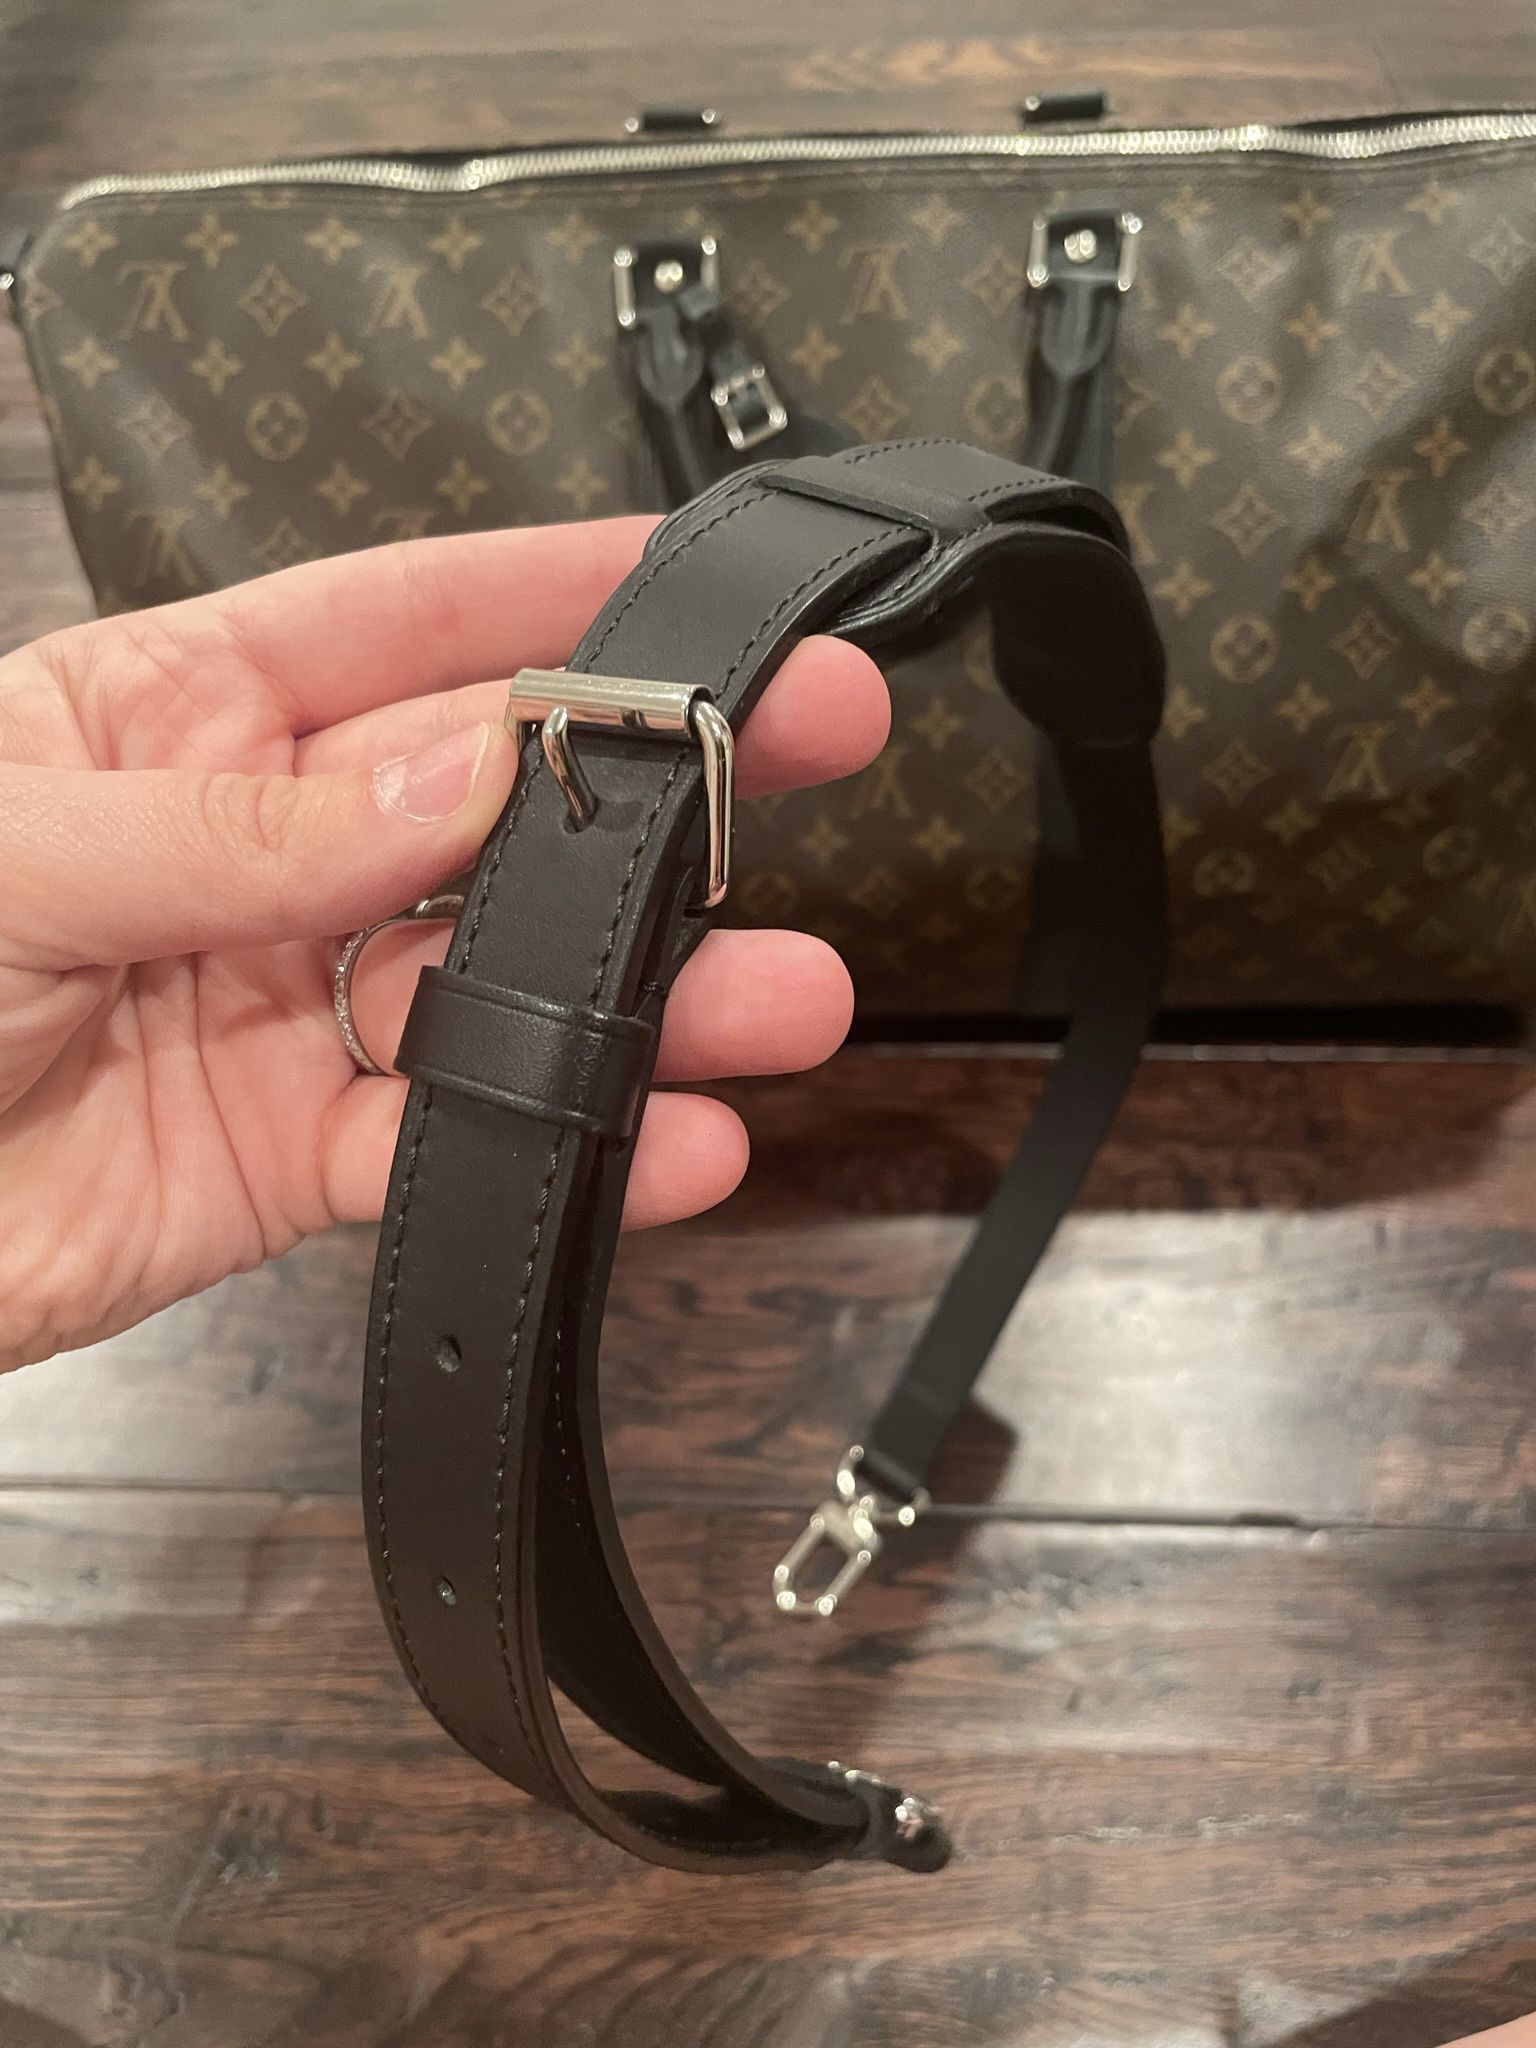 Louis Vuitton Steamer 45 luggage bag for Sale in Temple City, CA - OfferUp